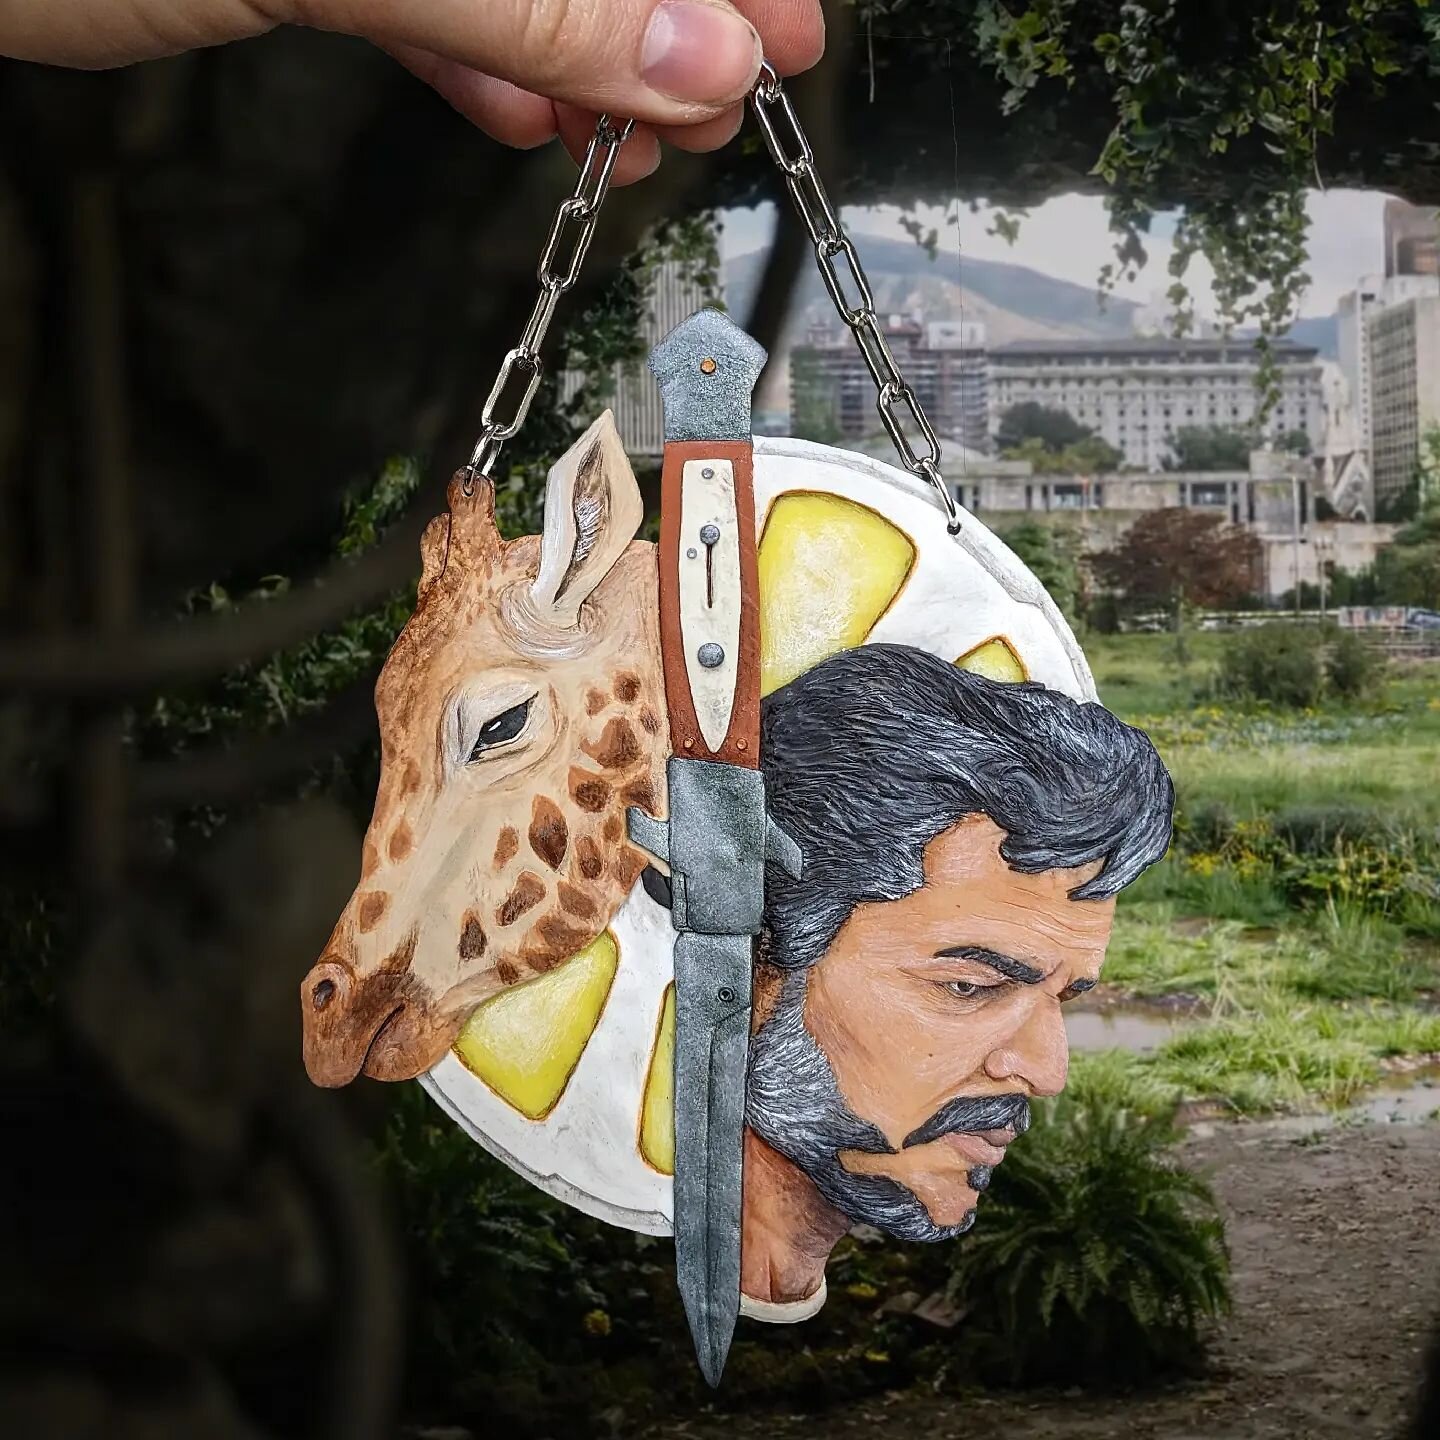 🦒 HBO THE LAST OF US EP.9 🧔

This was very delayed but here it is!! I finally got round to finishing the wall hanging for the last episode and look how cool it turned out! 

I'm so pleased with how I was able to bring this together, I tried my best